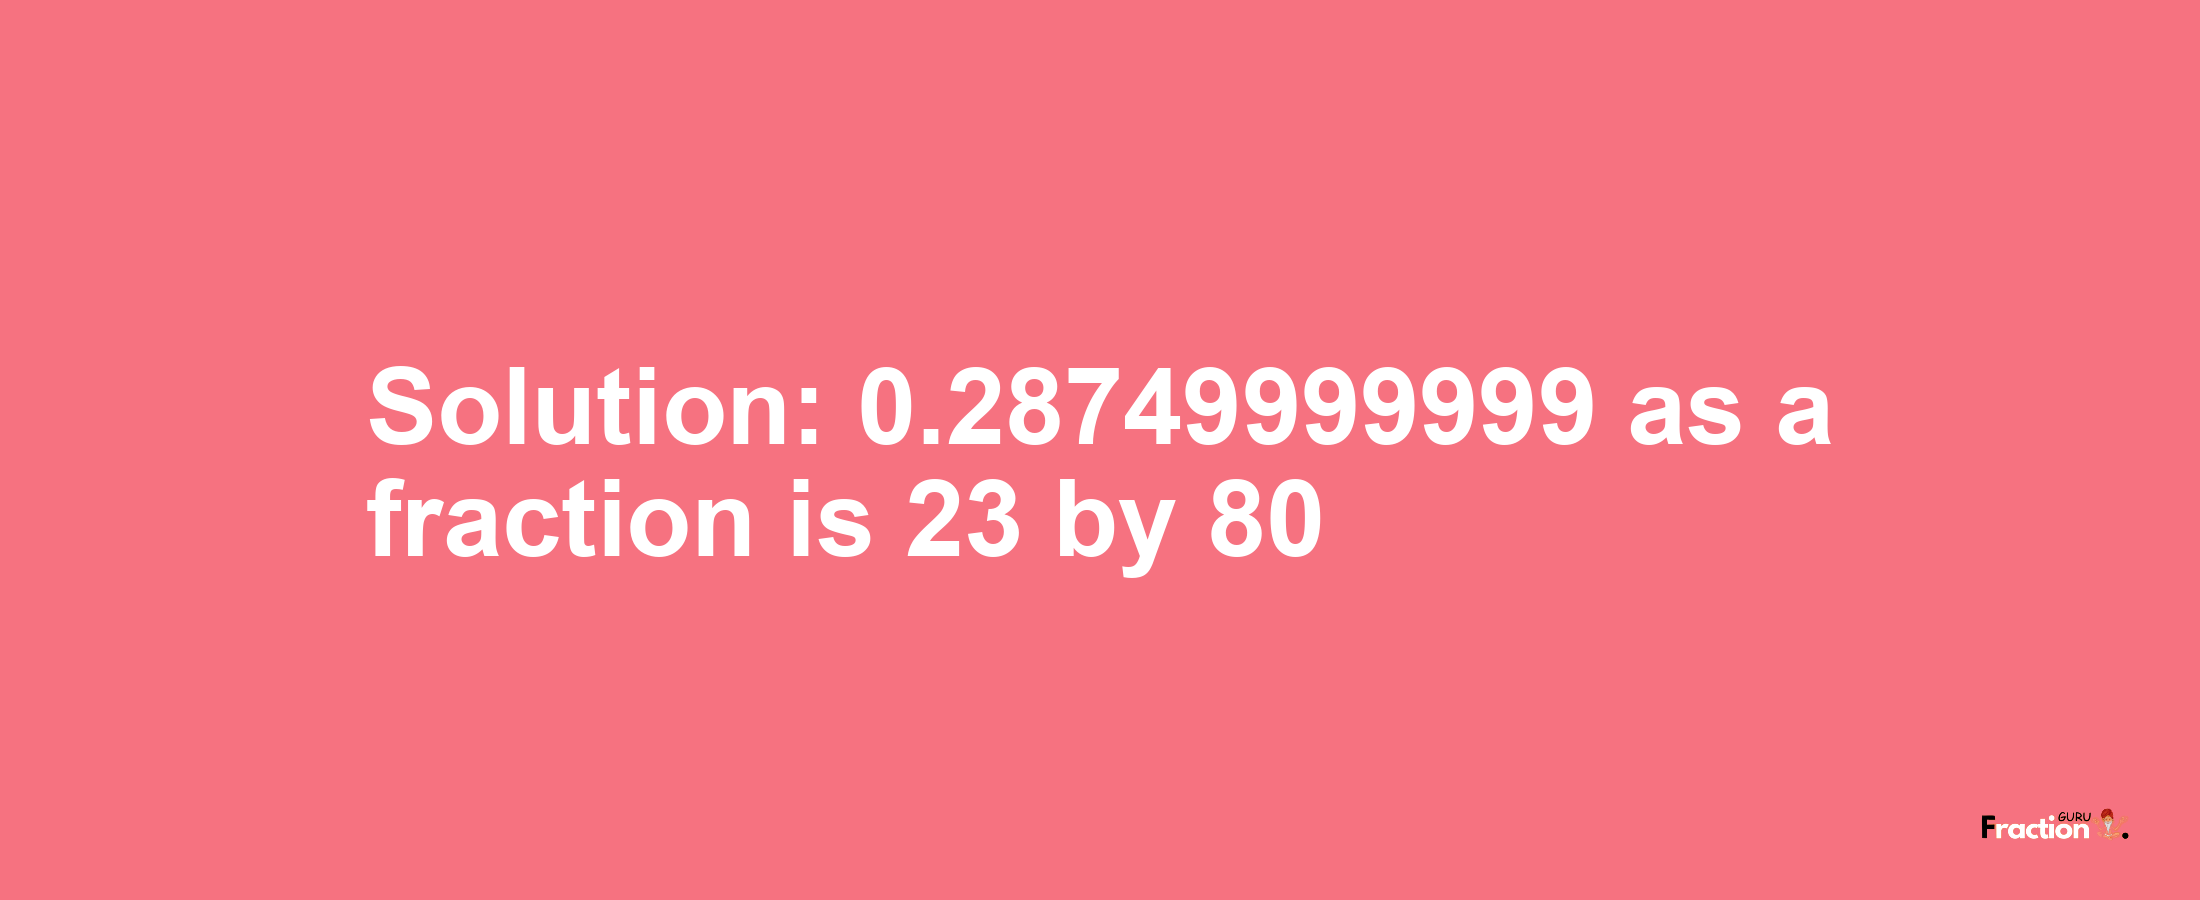 Solution:0.28749999999 as a fraction is 23/80